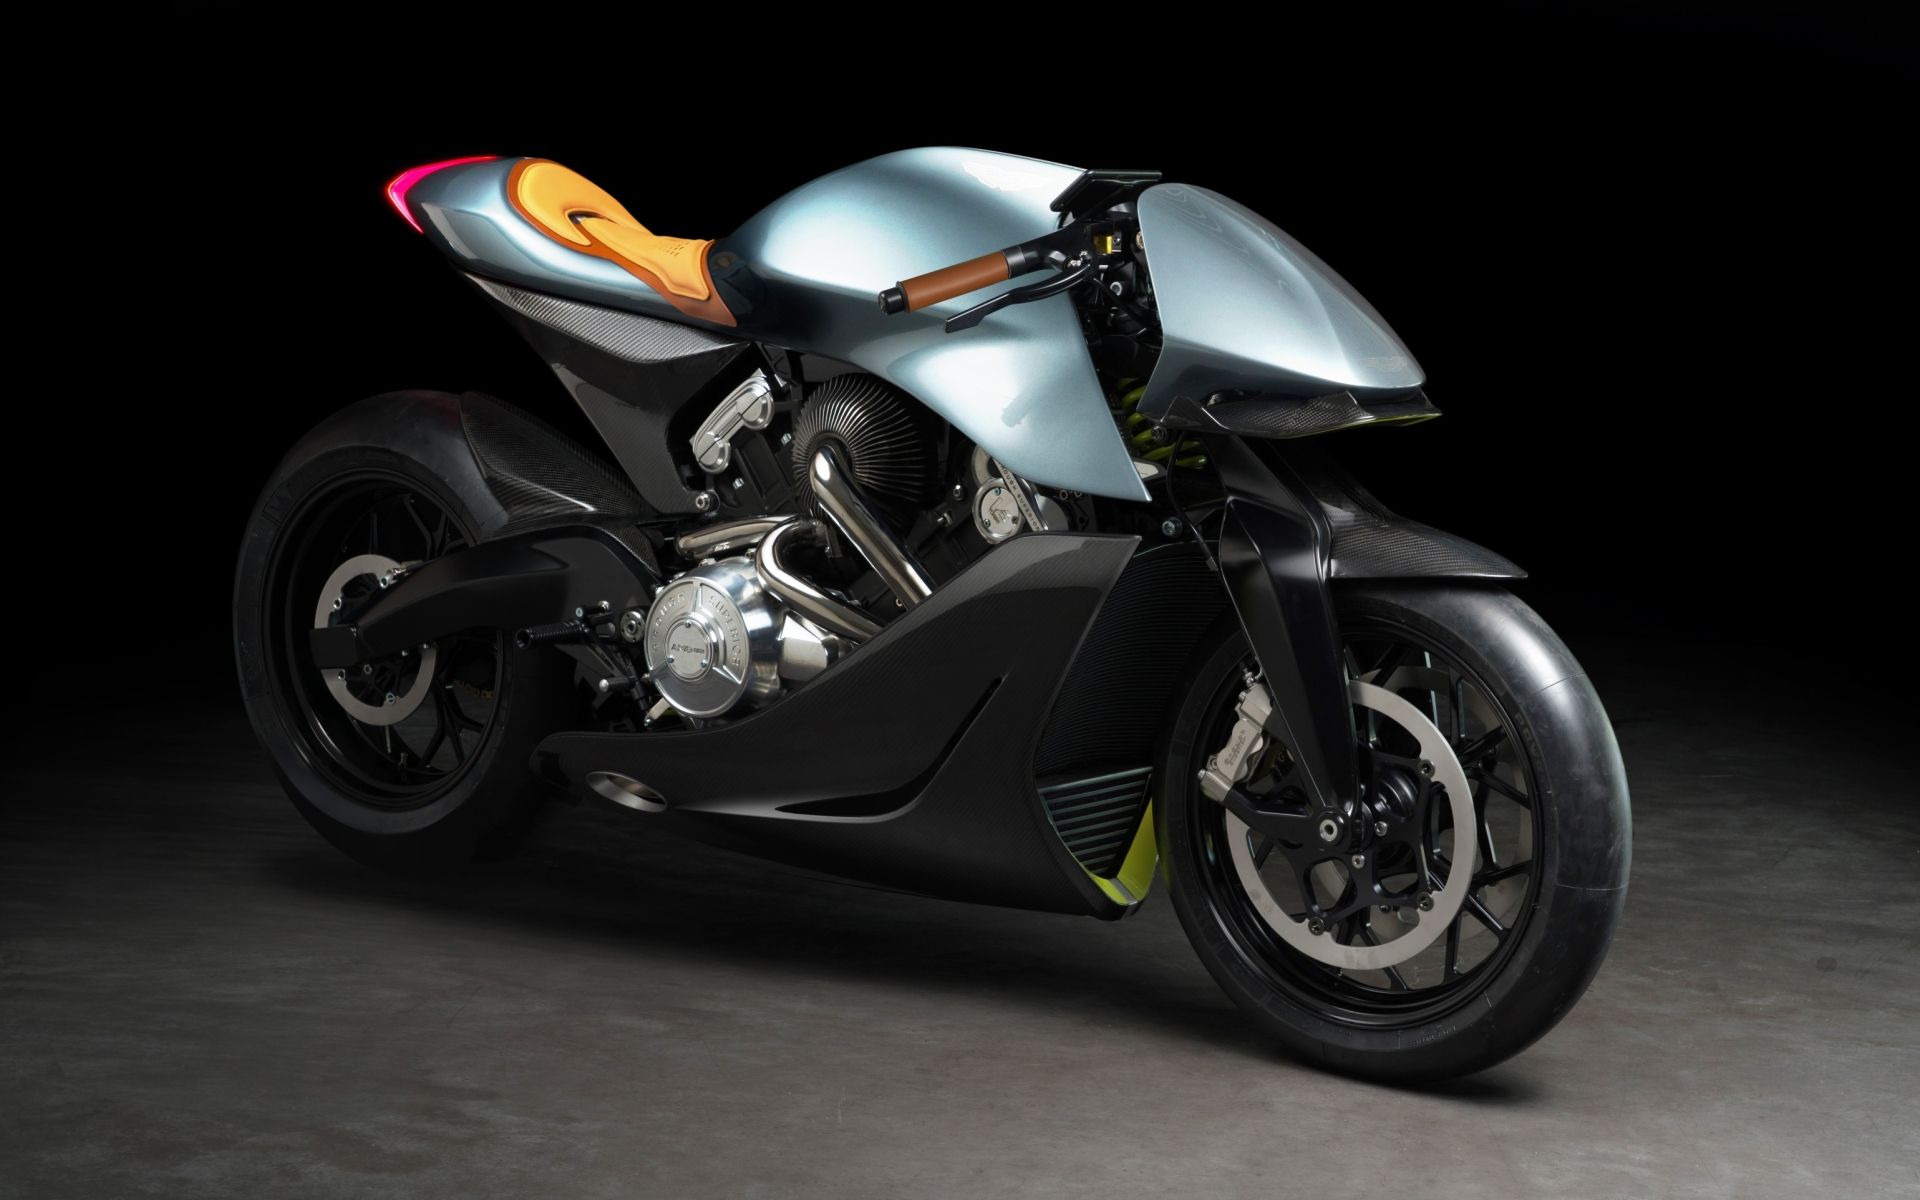 Aston Martin unveils its first-ever motorcycle AMB 001